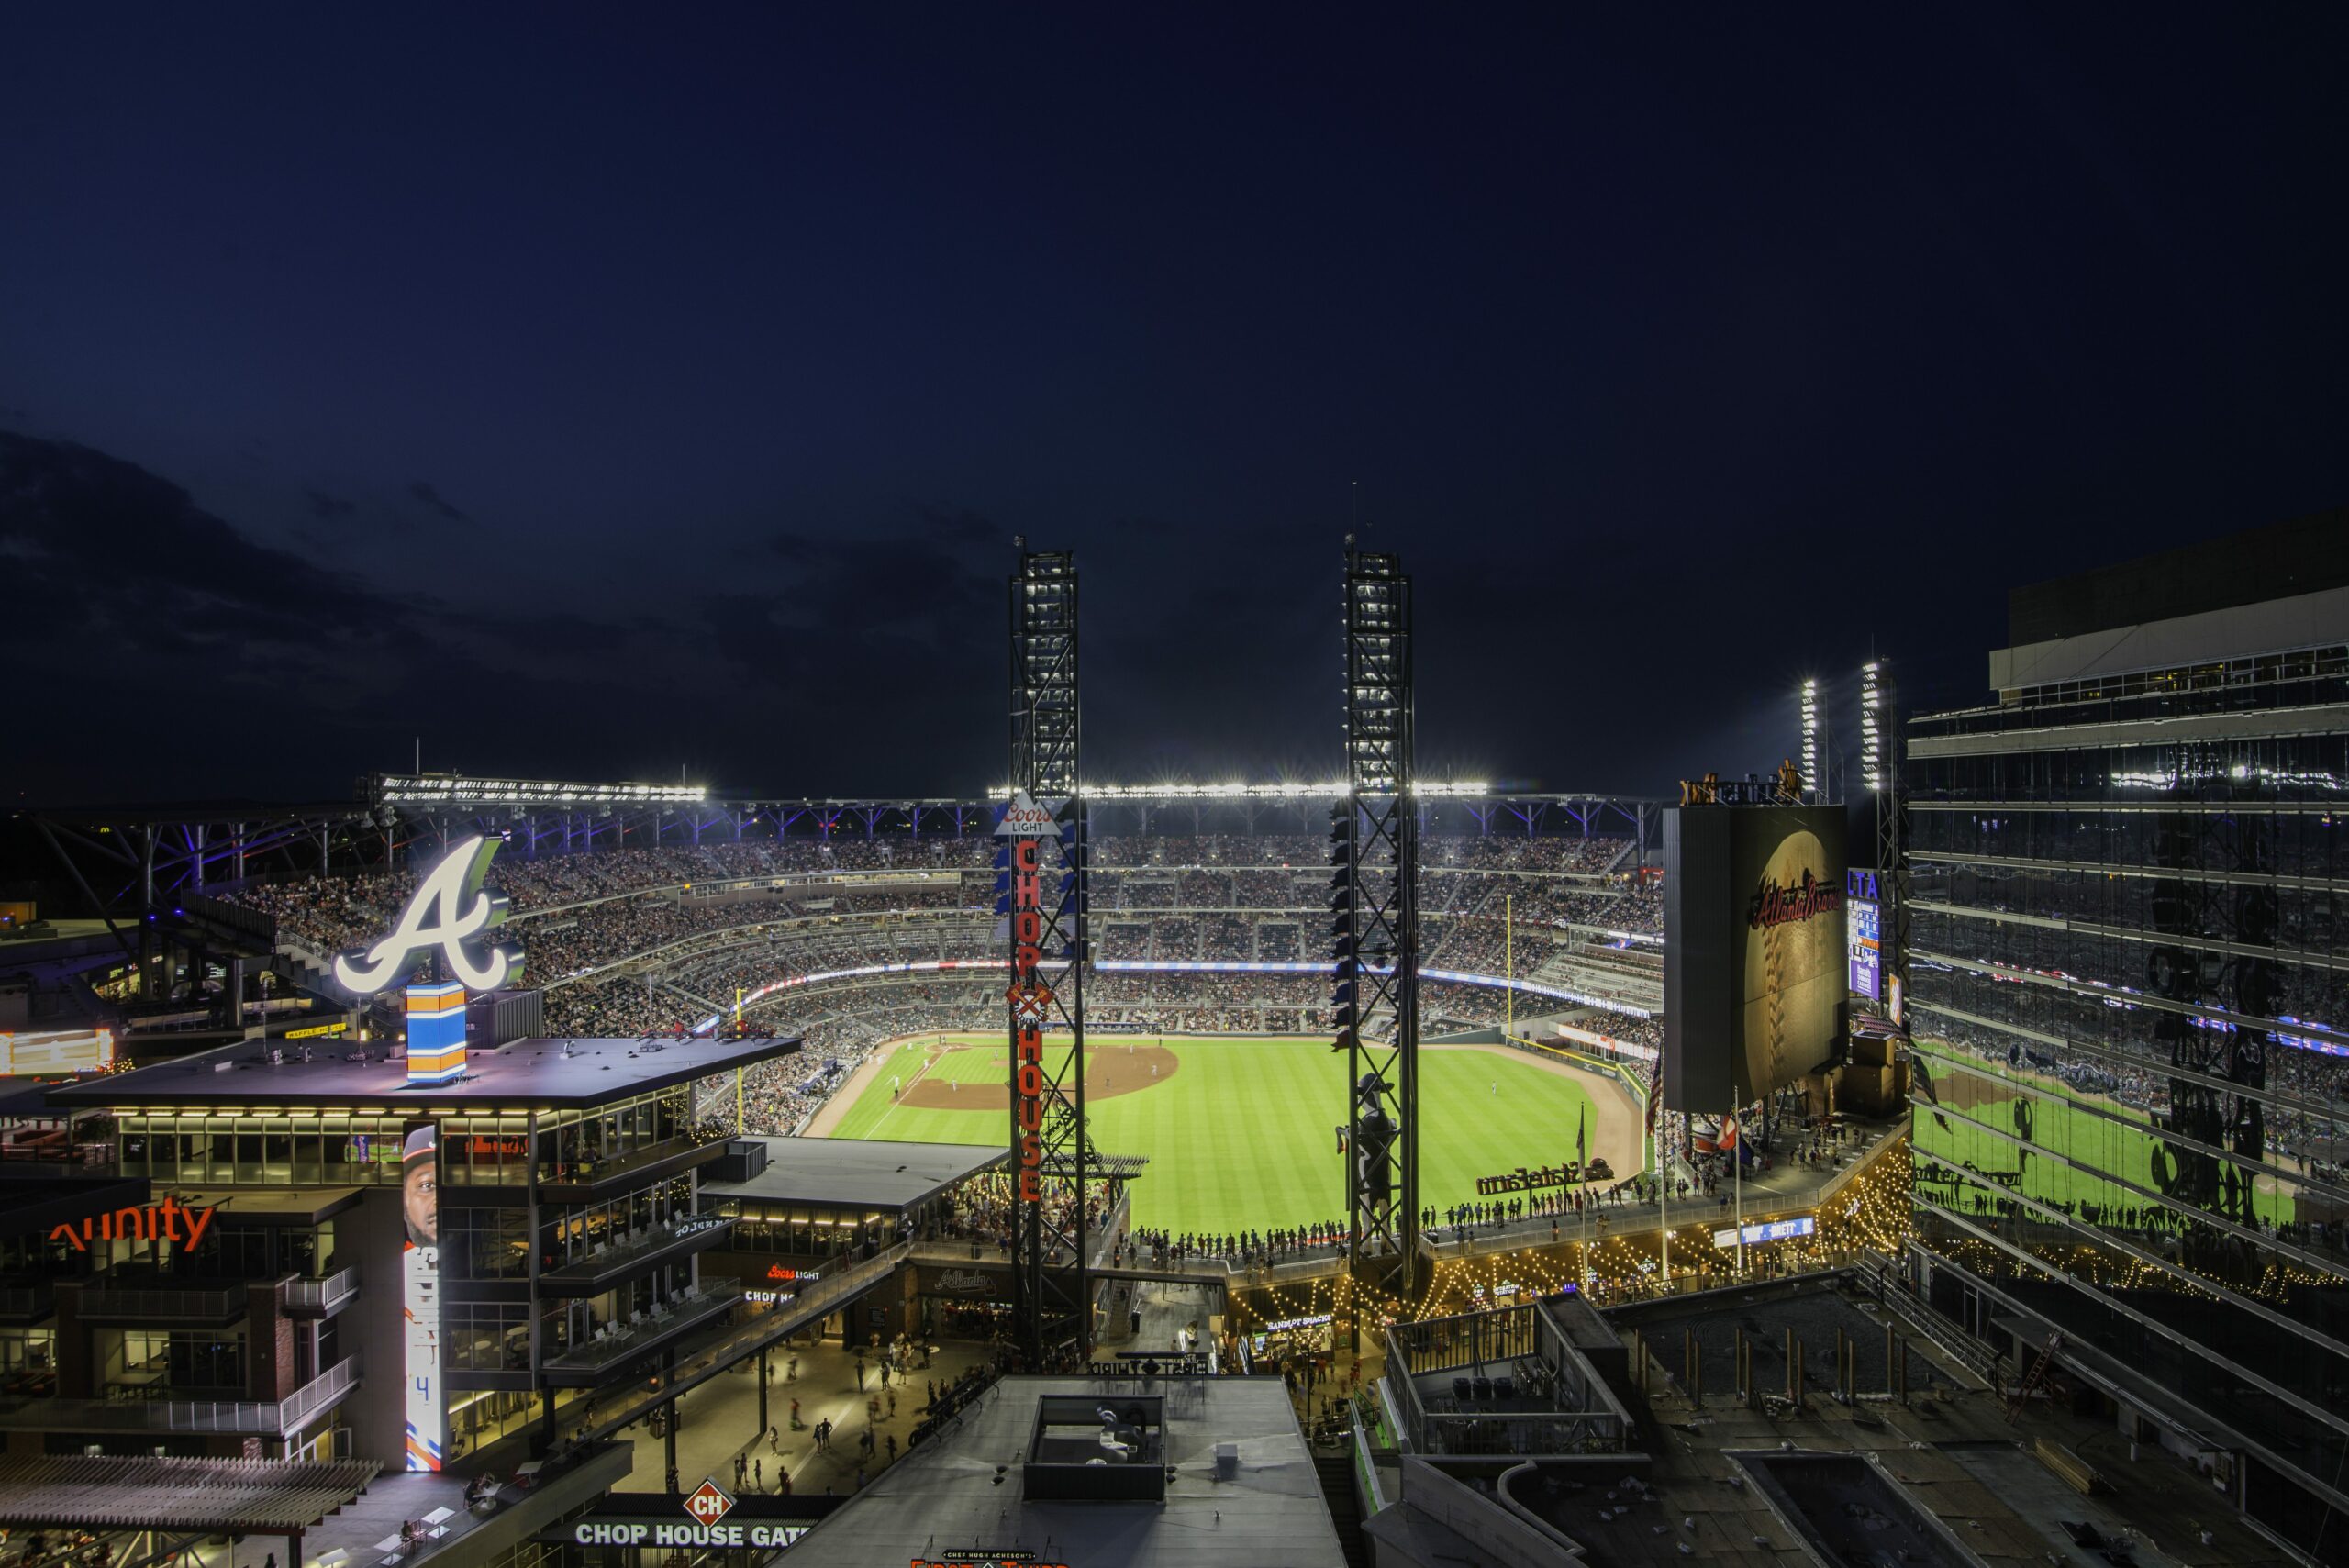 Truist Park - pictures, information and more of the Atlanta Braves ballpark